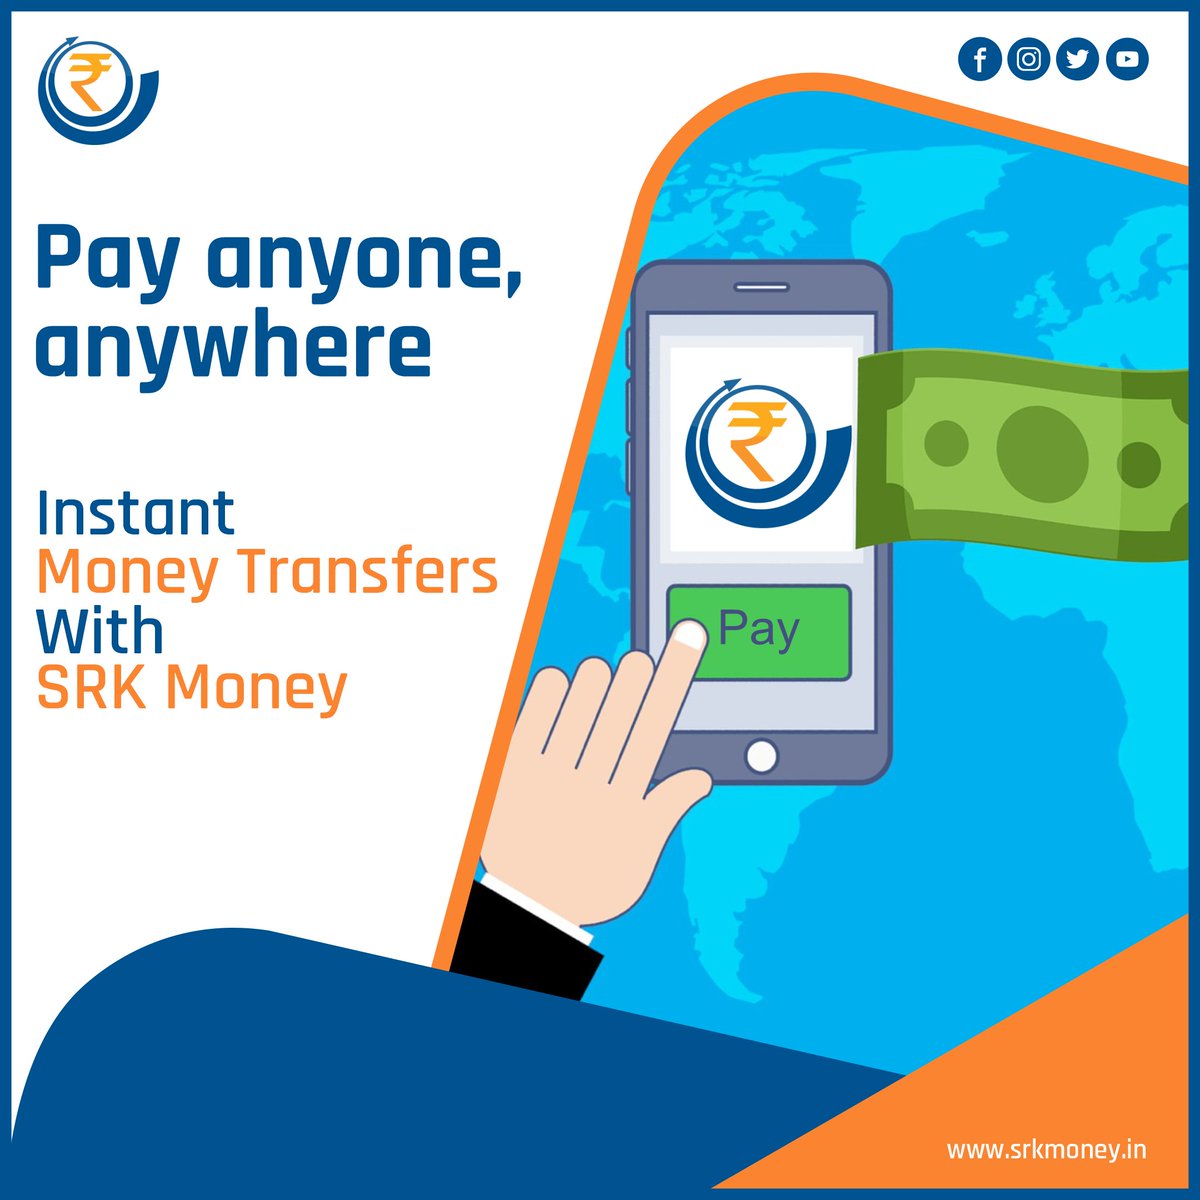 Domestic Money Transfer allows you to Transfer Money to your Family, Friends, Employees, and Unbanked consumers across India. 💰💰💰 
#Domestic #Money #Transfer #DomesticMoneyTransfer #MoneyTransfer #DomesticTransfer #SRKMoney #fintech #instantmoneytransfer